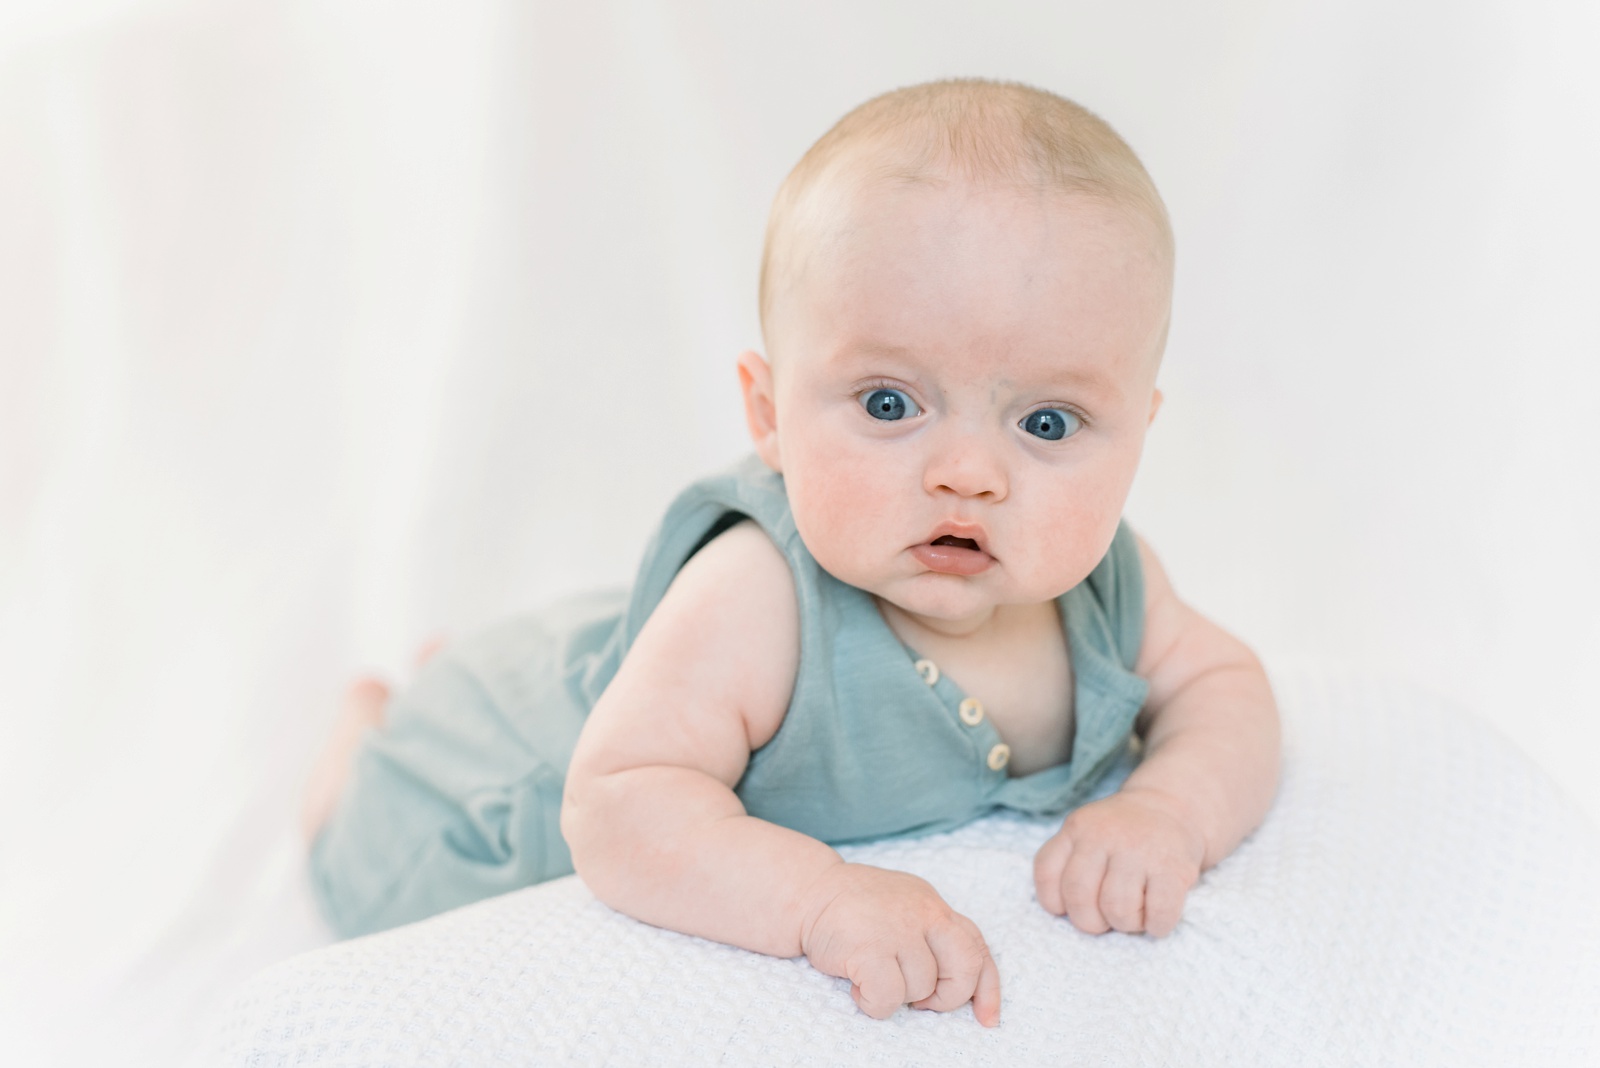 sweet-baby-james-allen-4-and-5-months-old-photo_7608.jpg